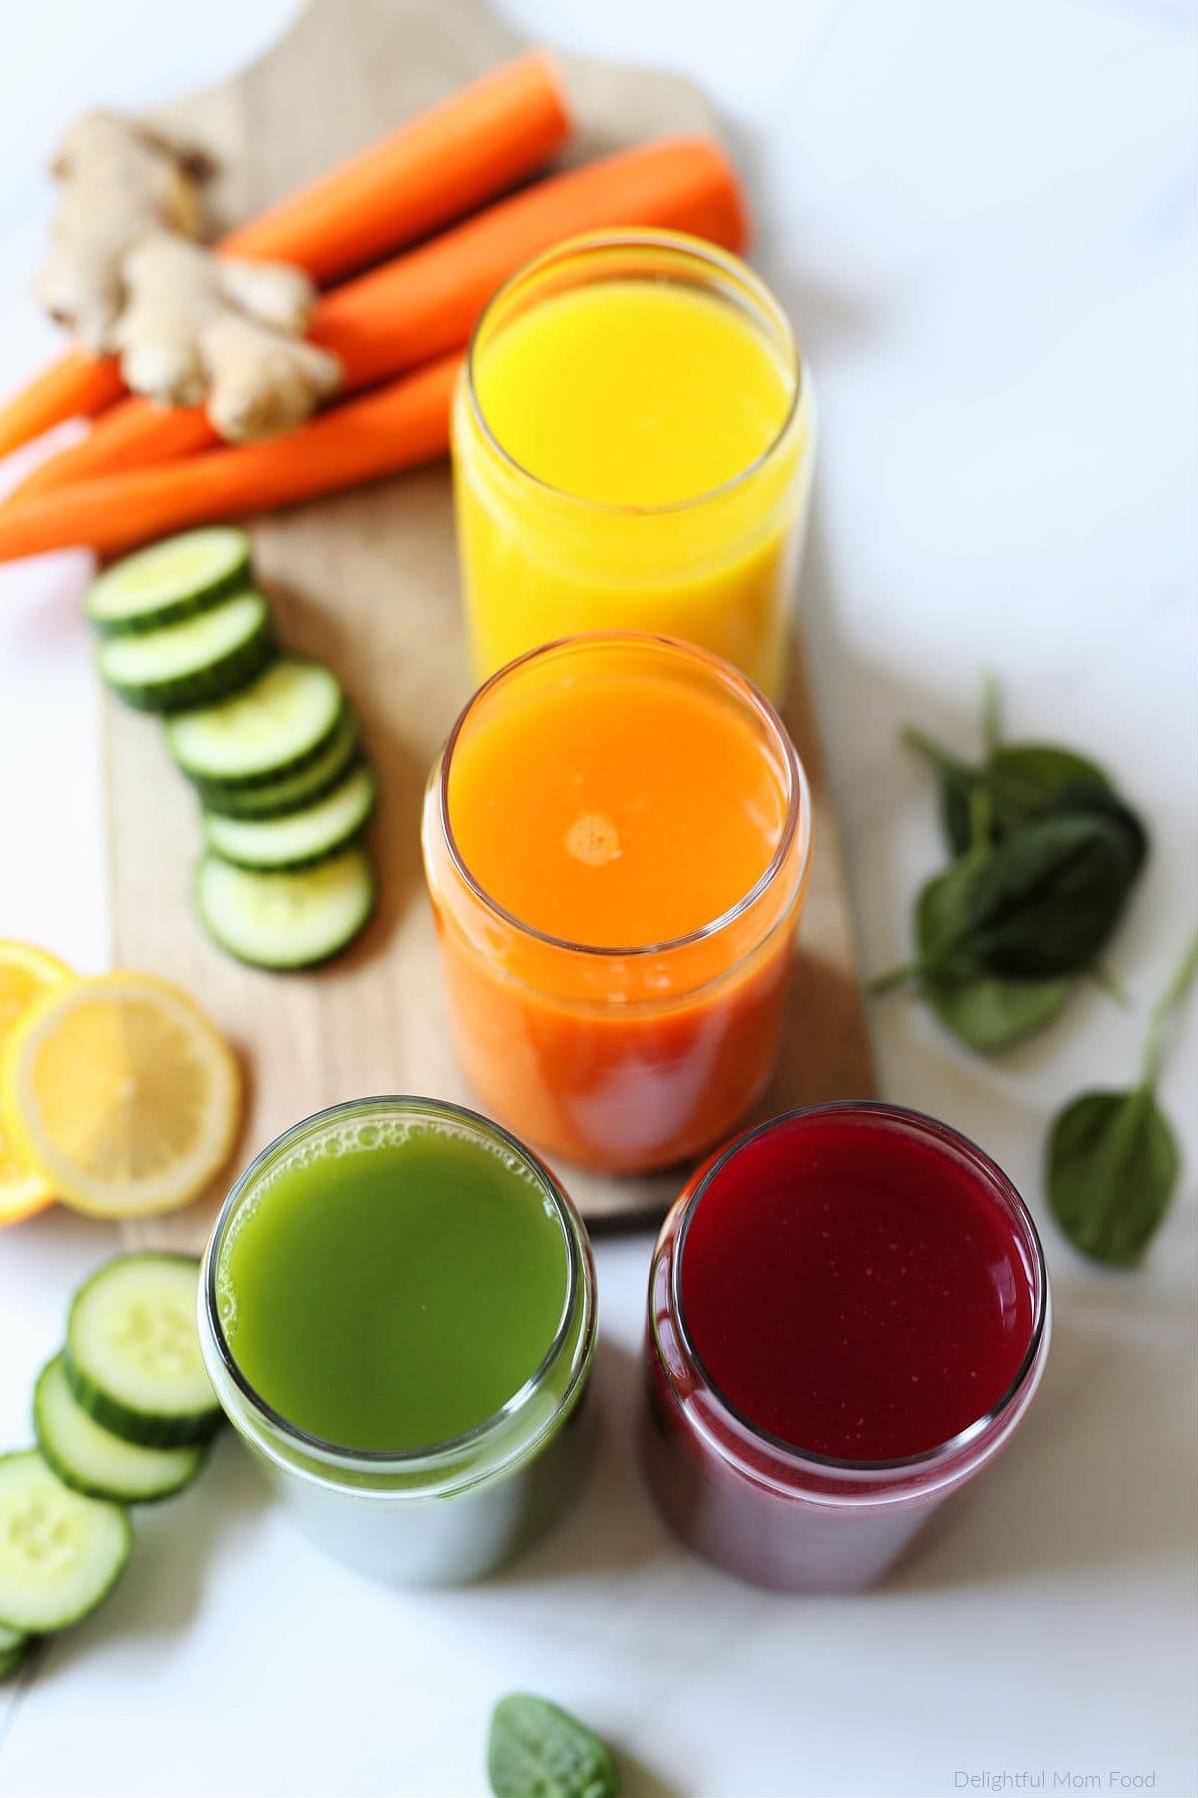  Hydrate and nourish your body in a delicious way with this energizing juice.